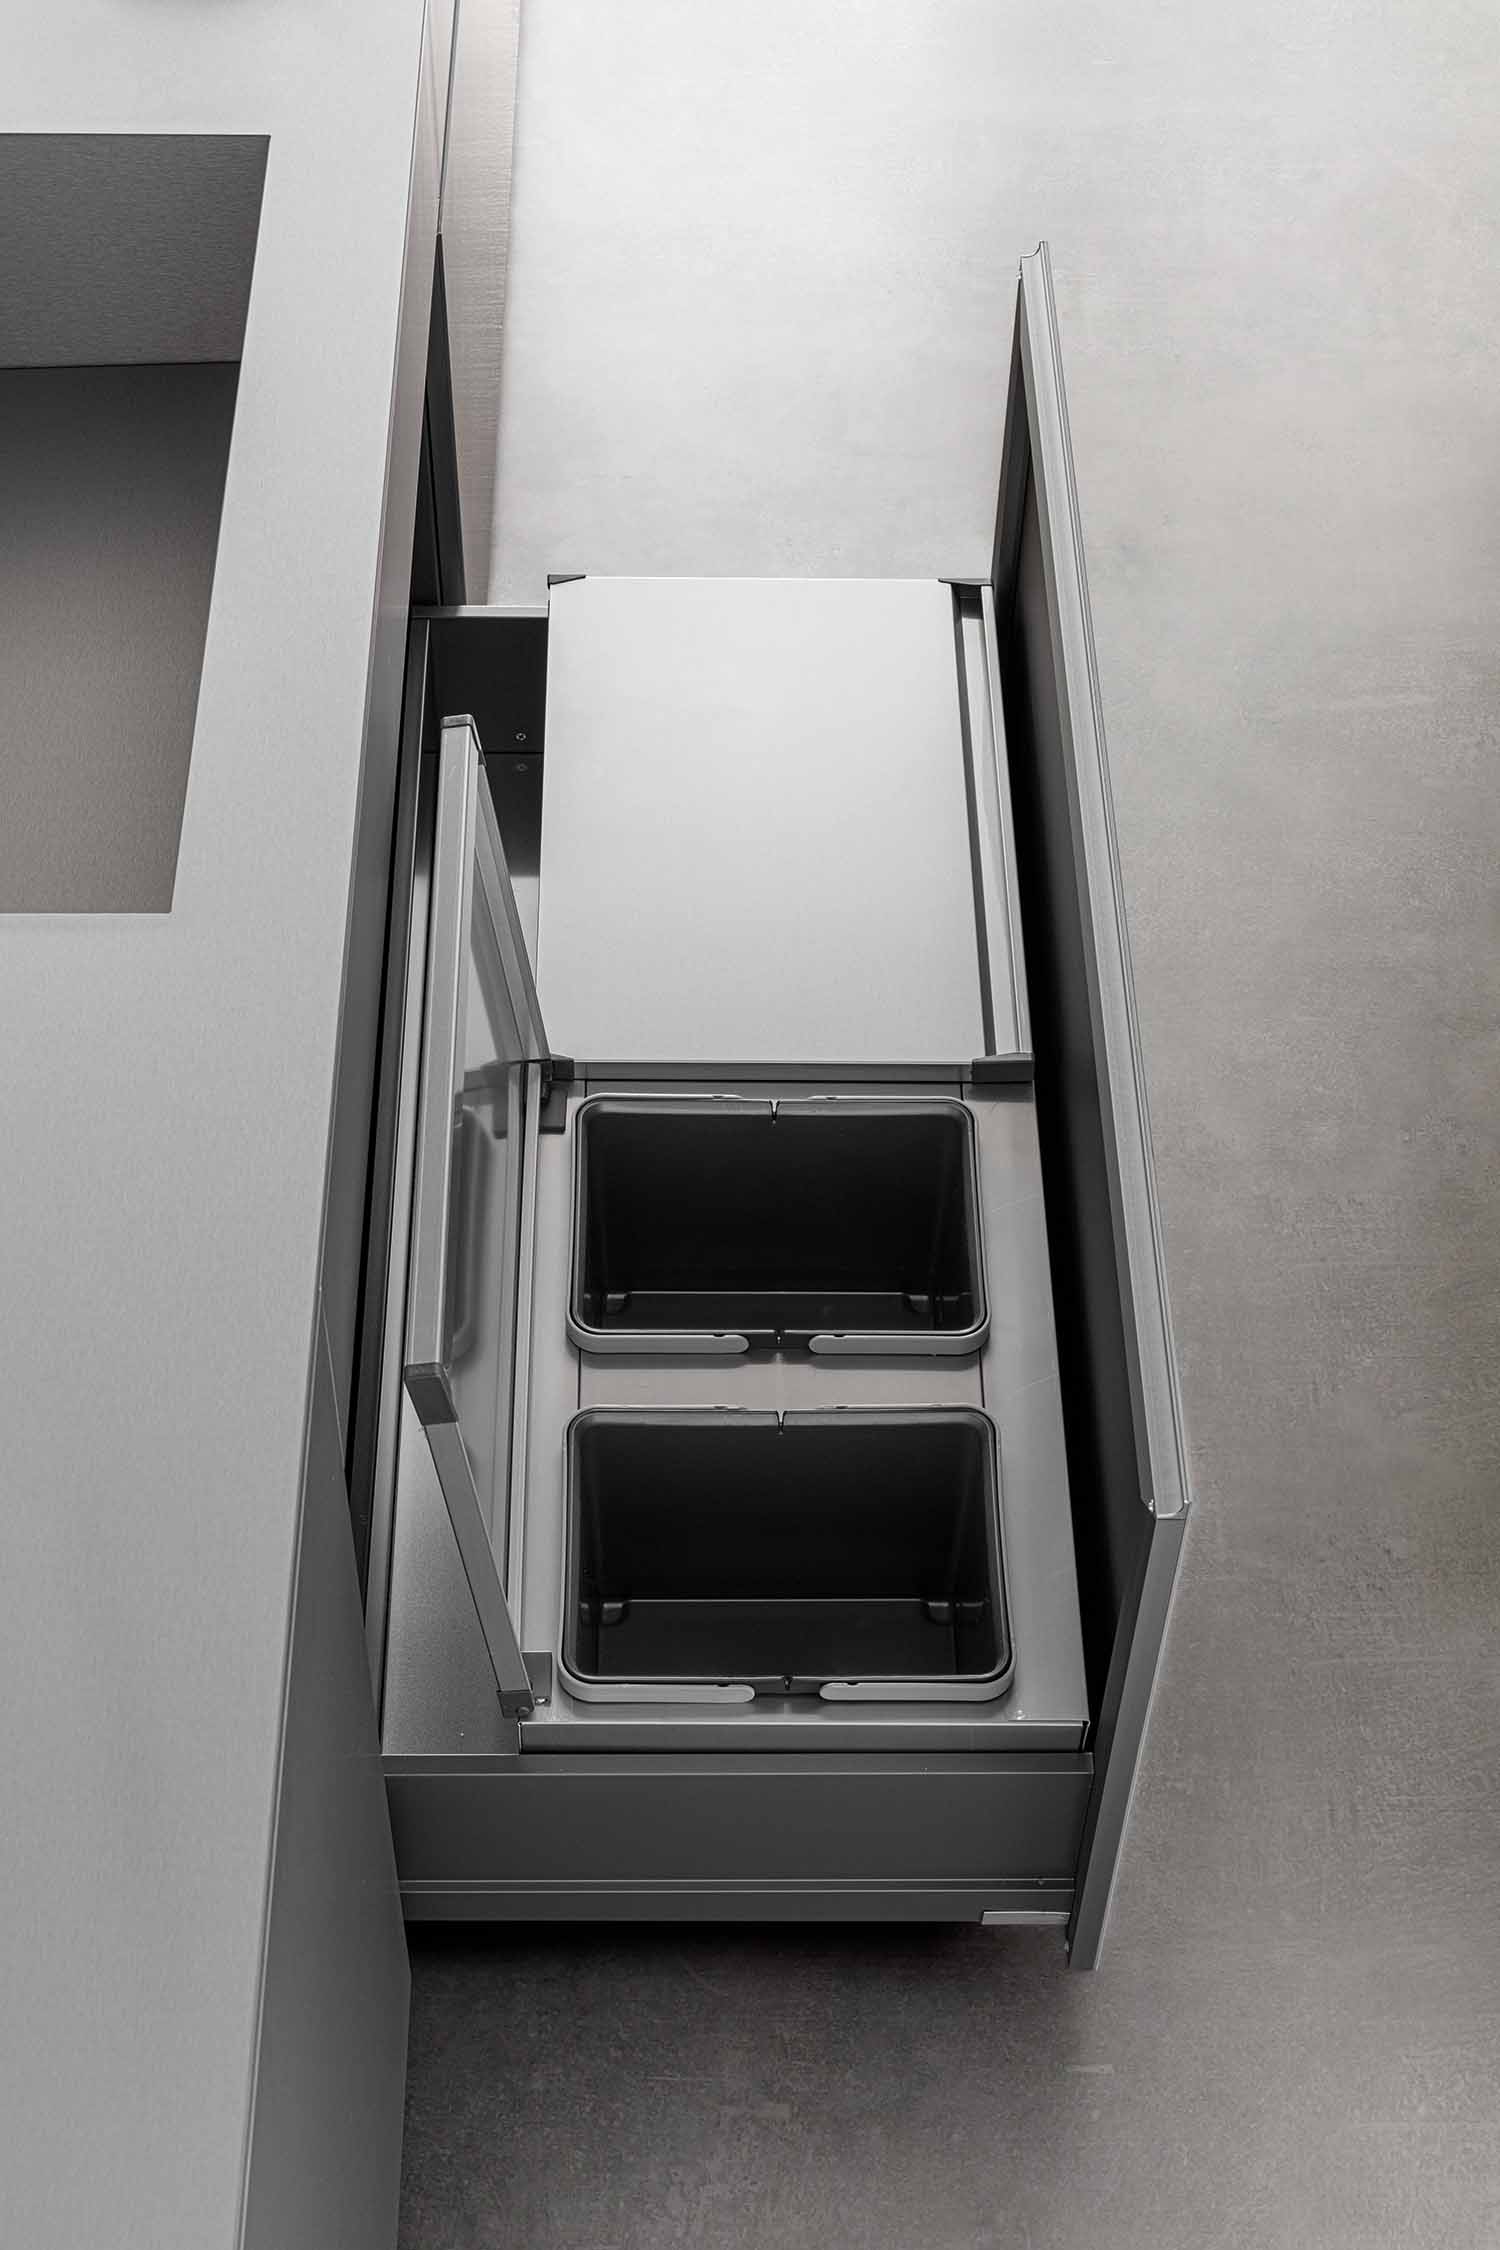 Internal bins placed out of sight within deep drawers.